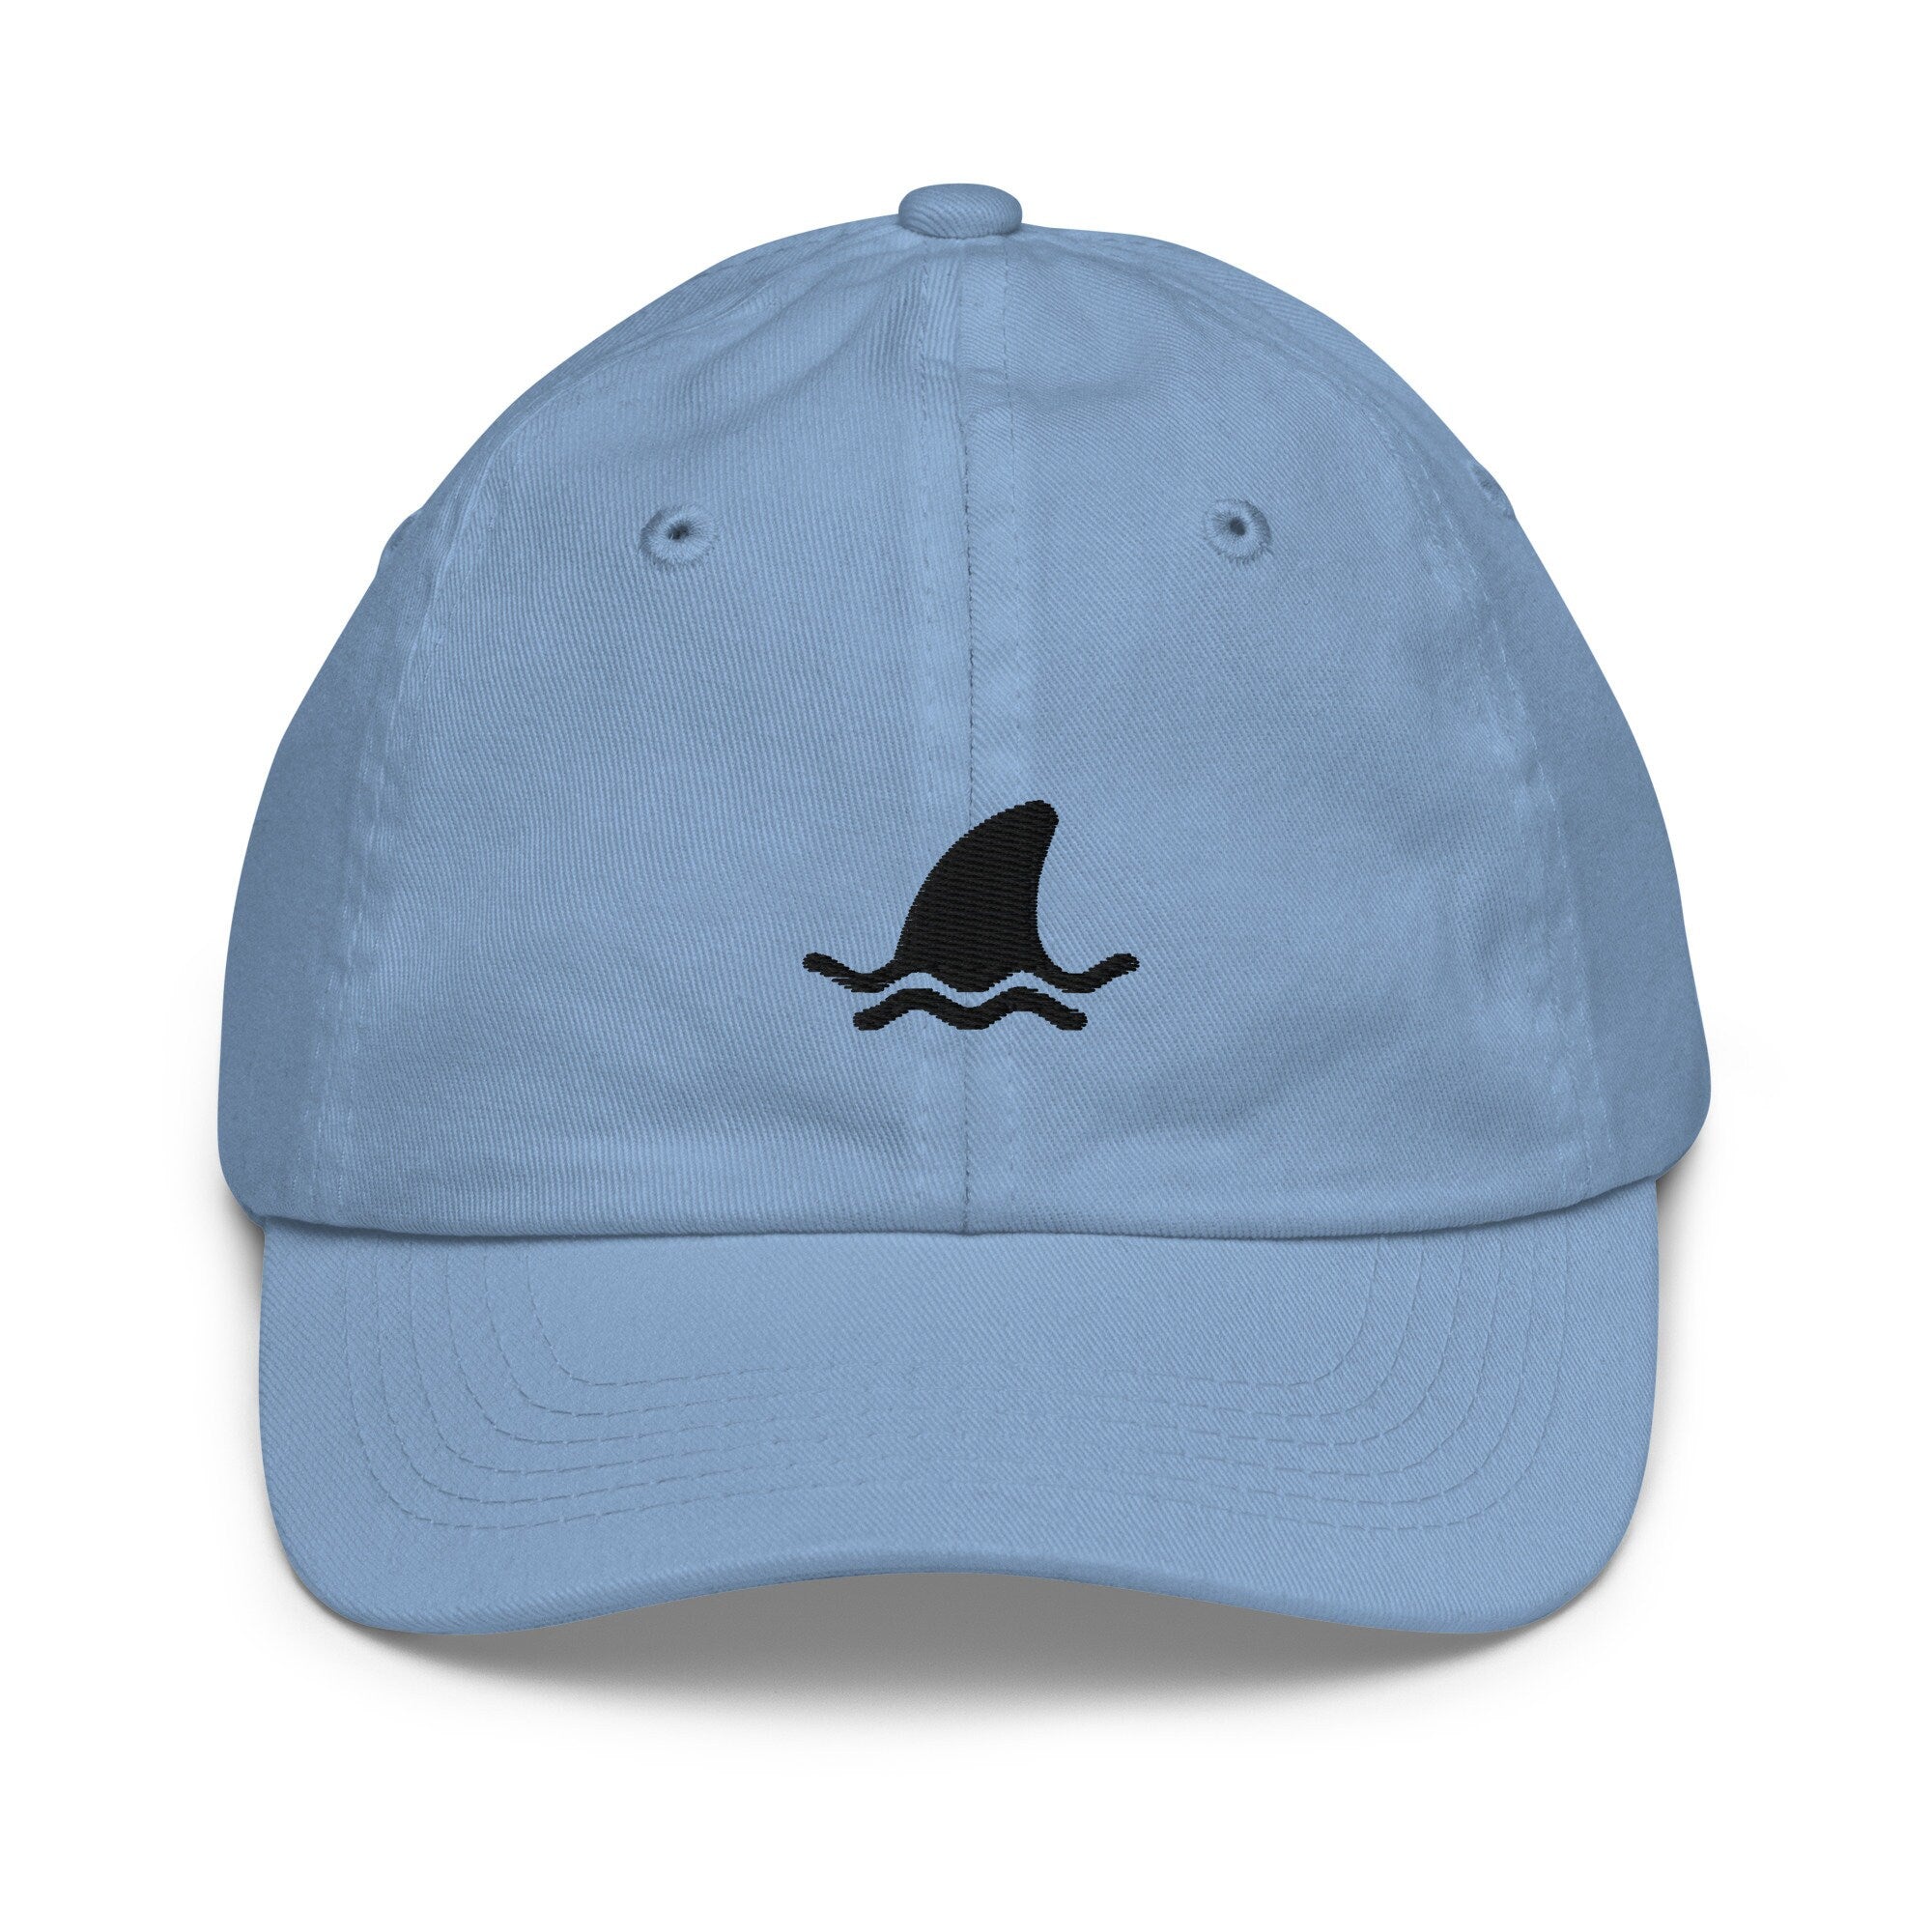 Shark Fin Youth Baseball Cap, Handmade Kids Hat, Embroidered Childrens Hat Gift - Multiple Colors